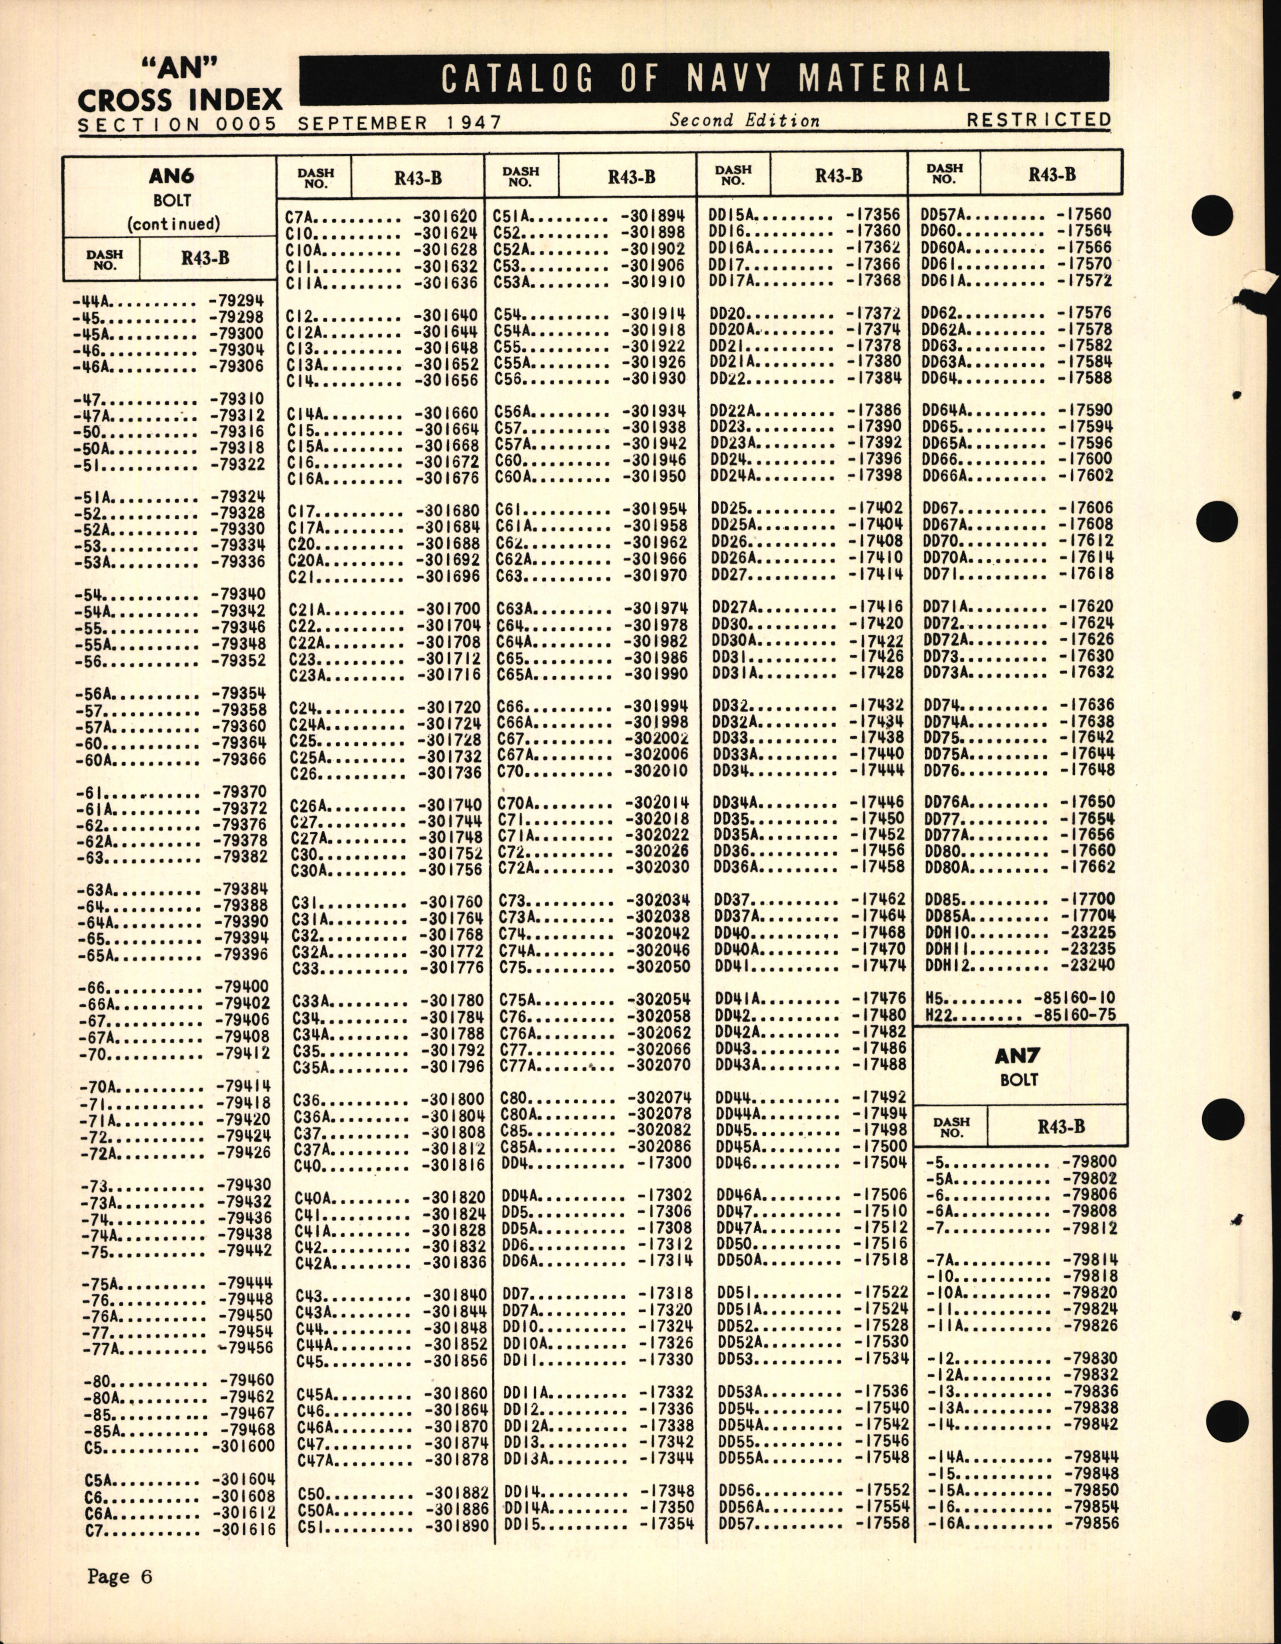 Sample page 6 from AirCorps Library document: Cross Index of 